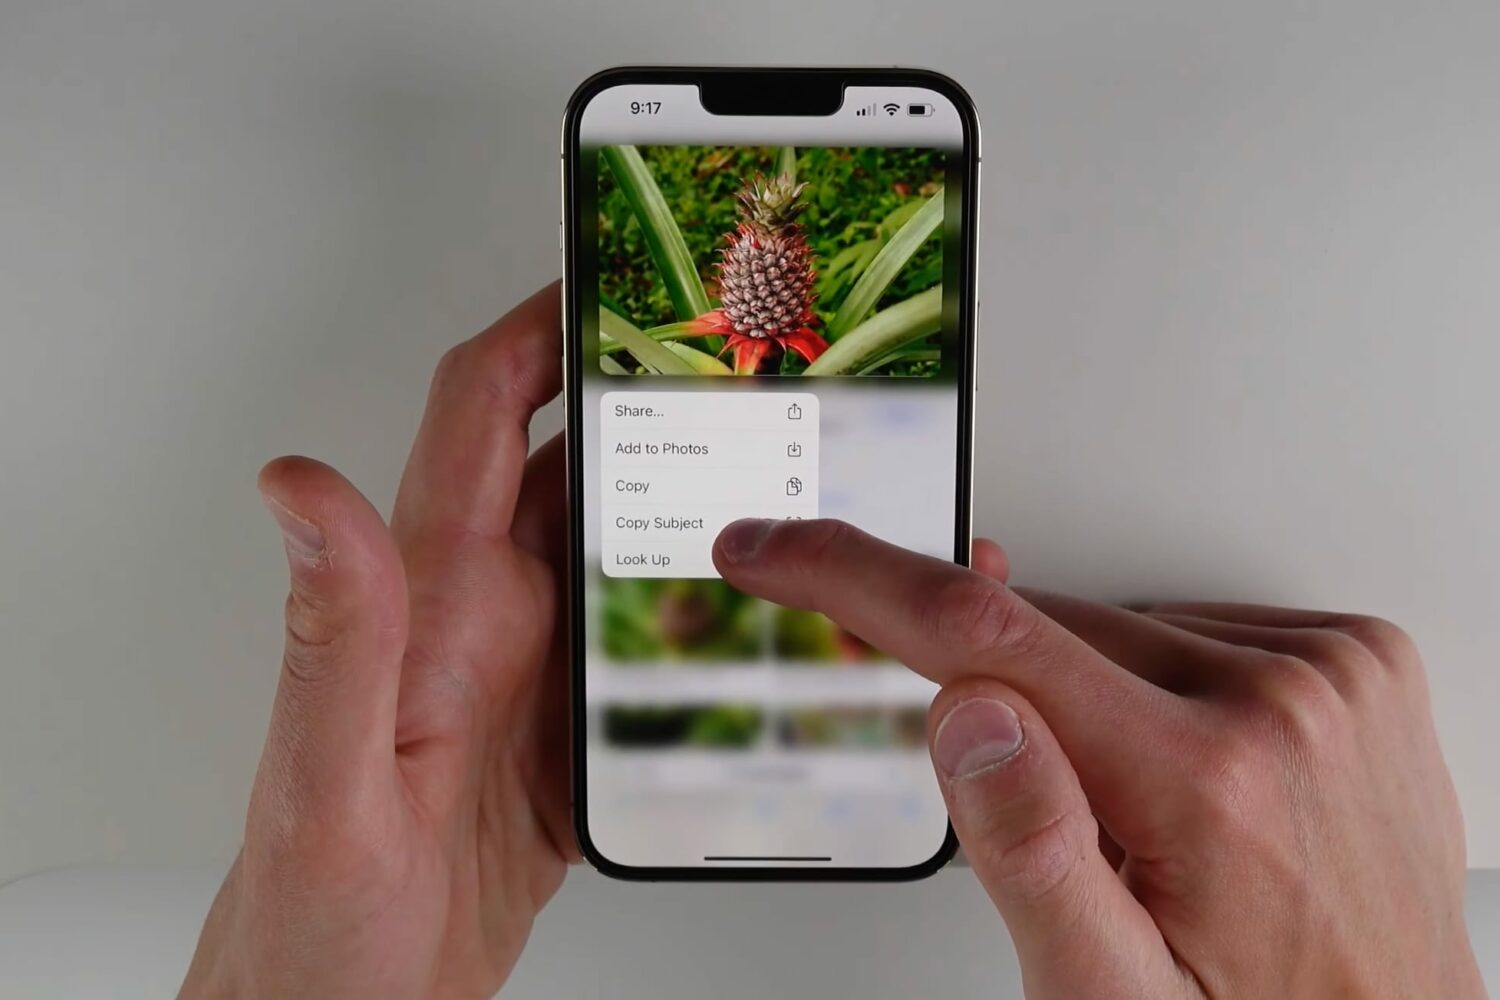 Demonstrating lifting the subject from an image in Safari on iOS 16. In this example, the user touches and holds their finger on a pineapple in the foreground of an image, producing a menu with the Copy Subject option.